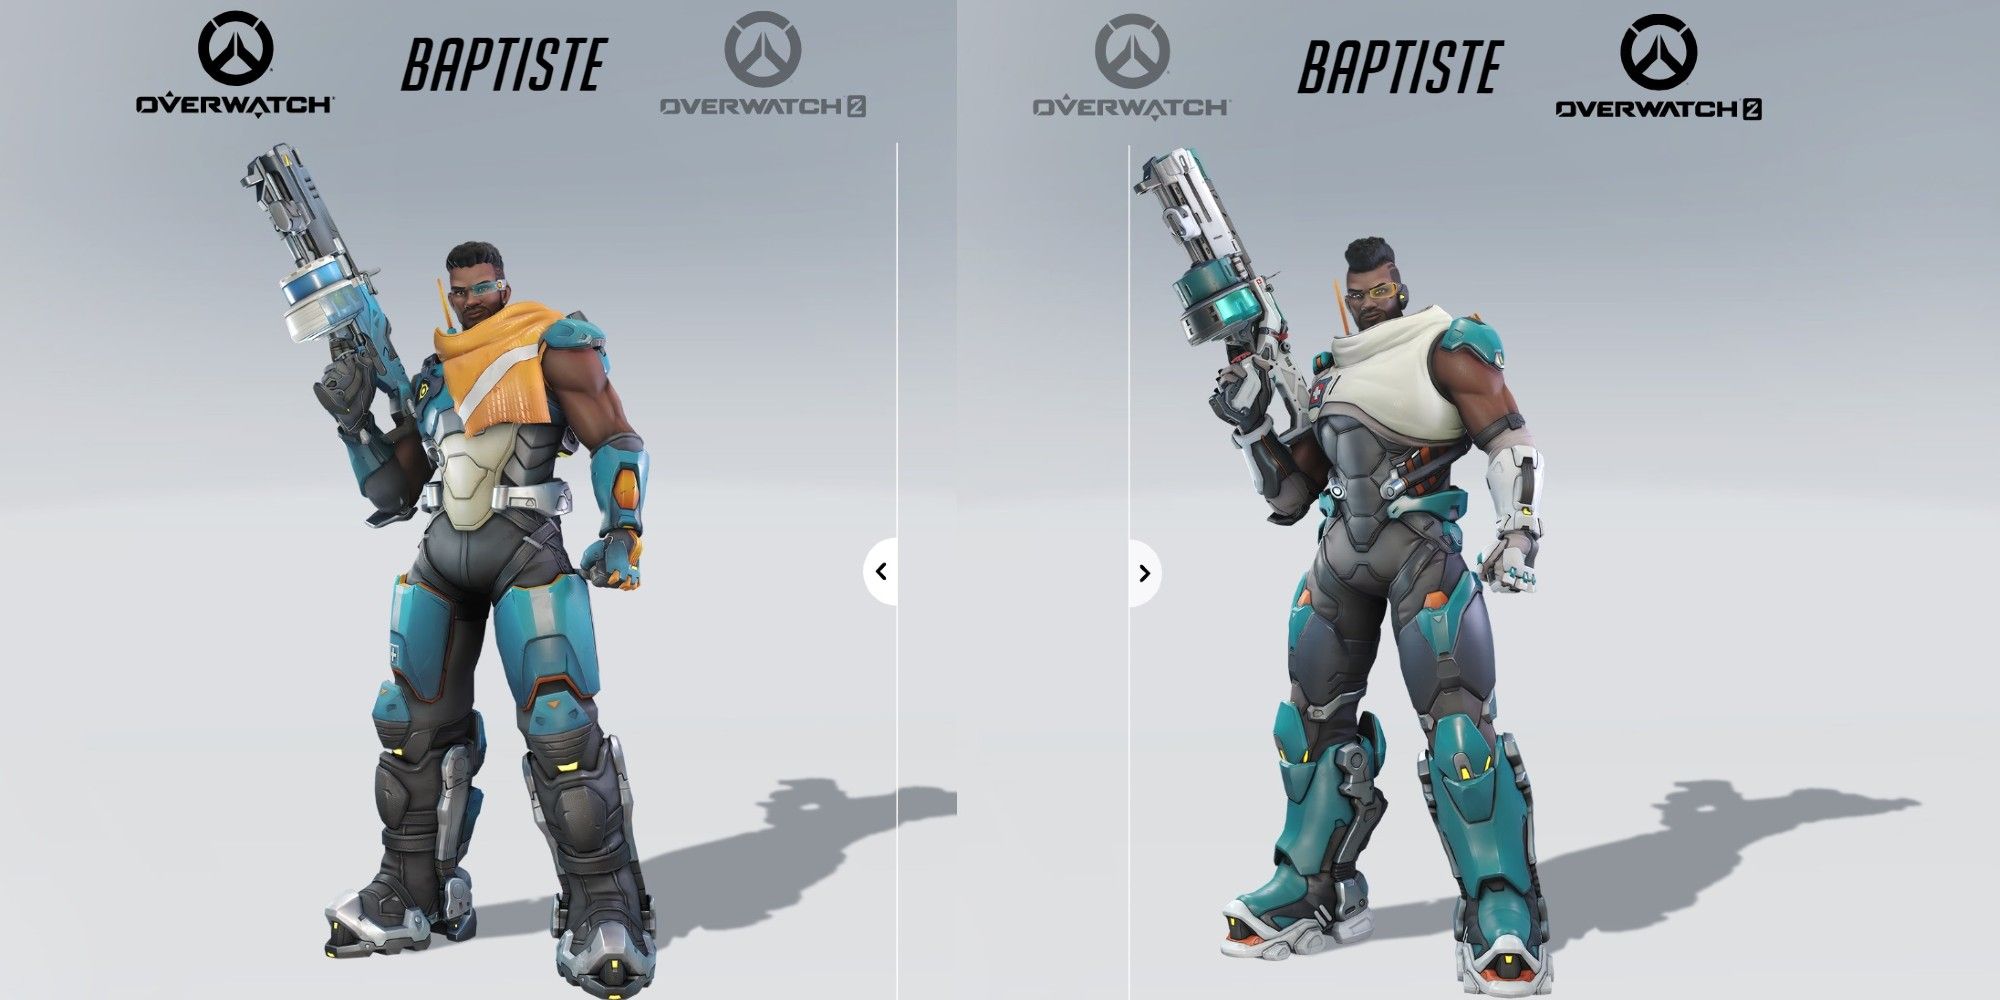 Baptiste Overwatch 2 new look skin ow ow2